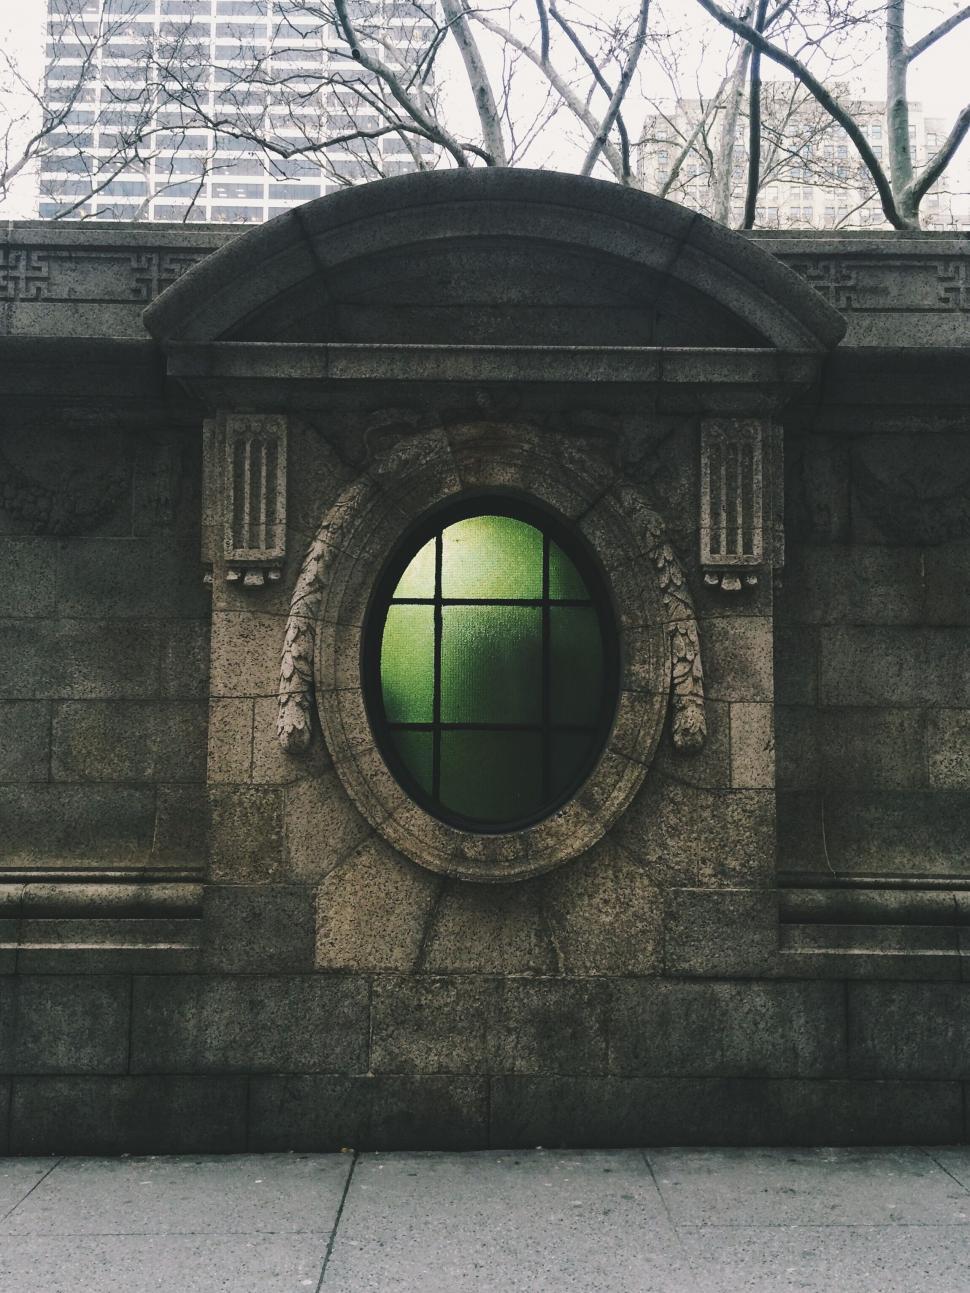 Free Image of Stone wall with oval green window in urban setting view 